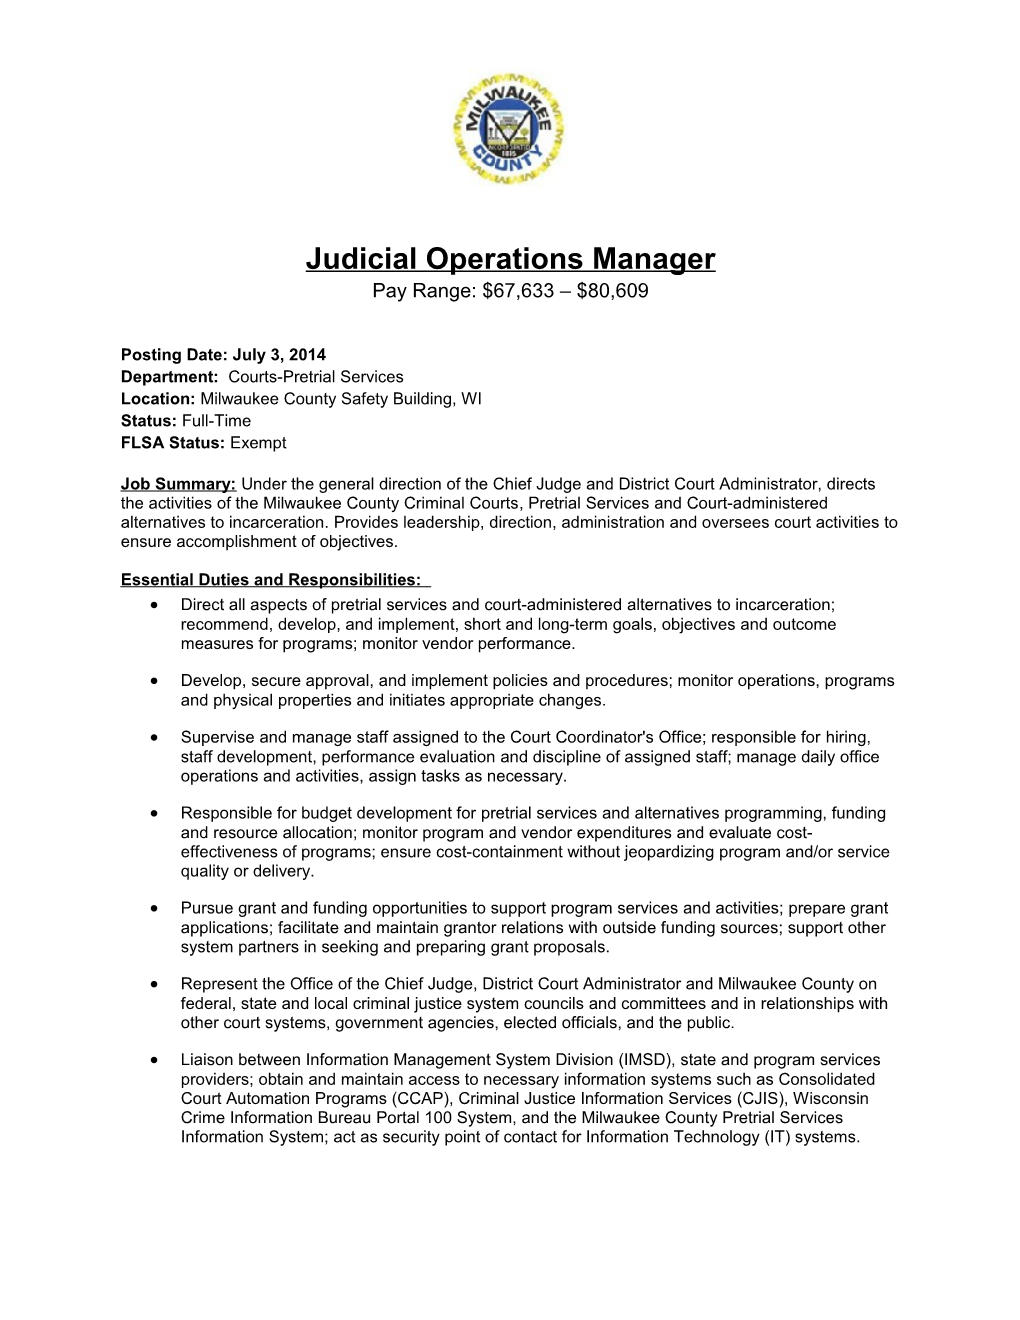 Judicial Operations Manager Pay Range: $67,633 $80,609